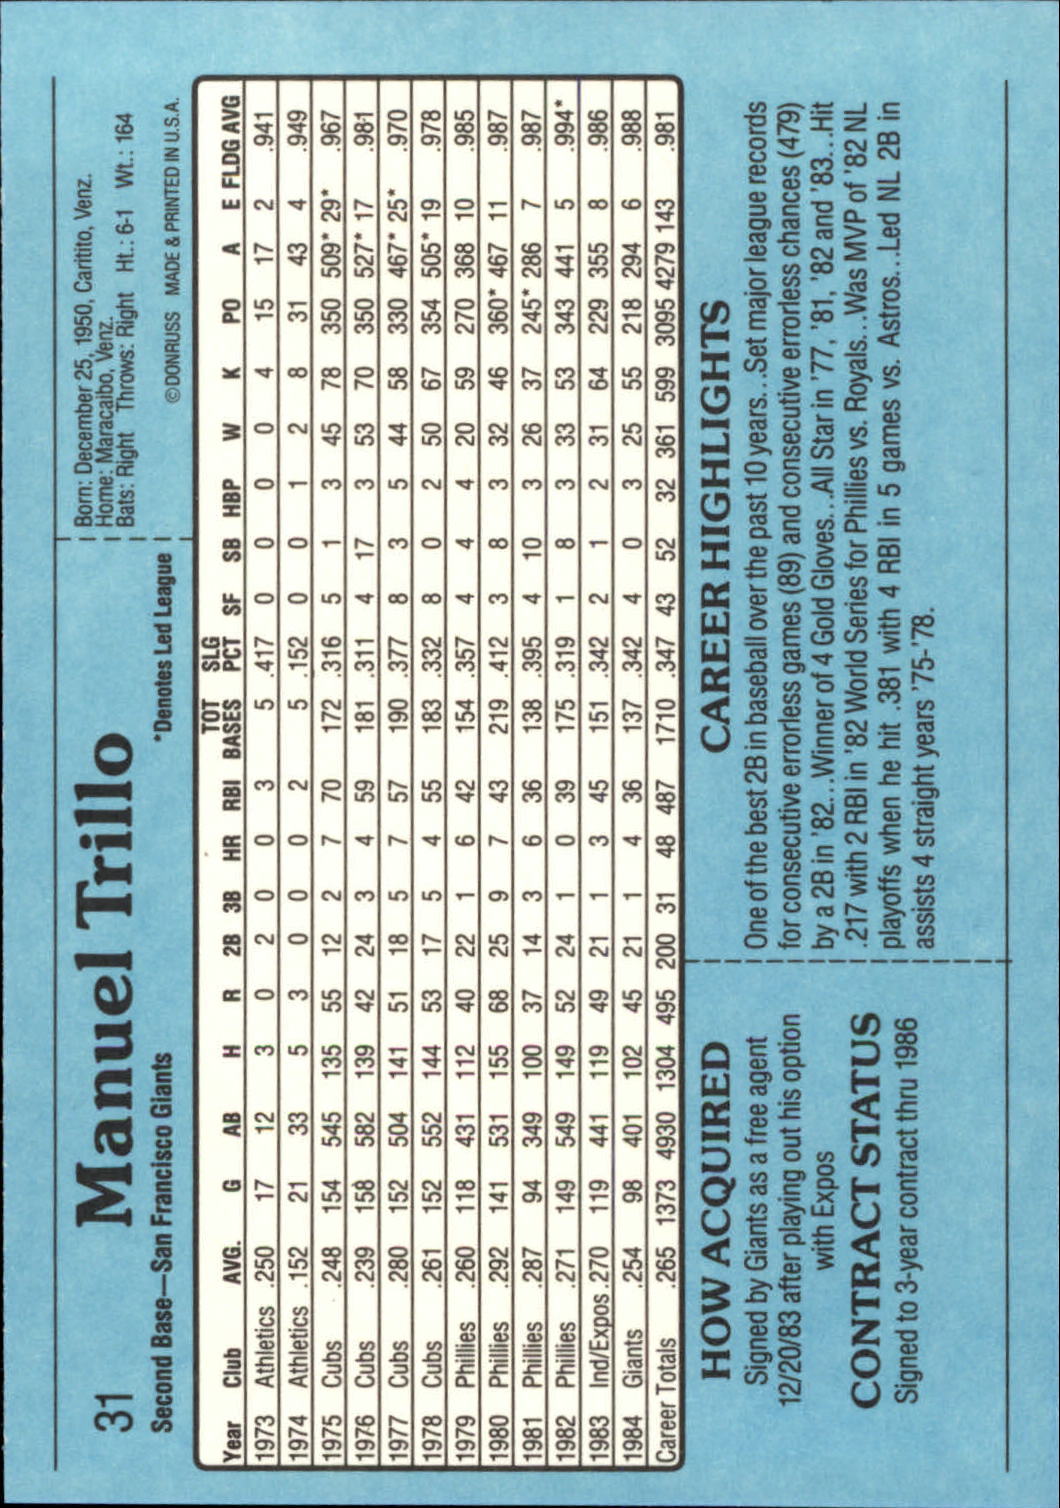 1985 Donruss Action All-Stars #31 Manny Trillo back image